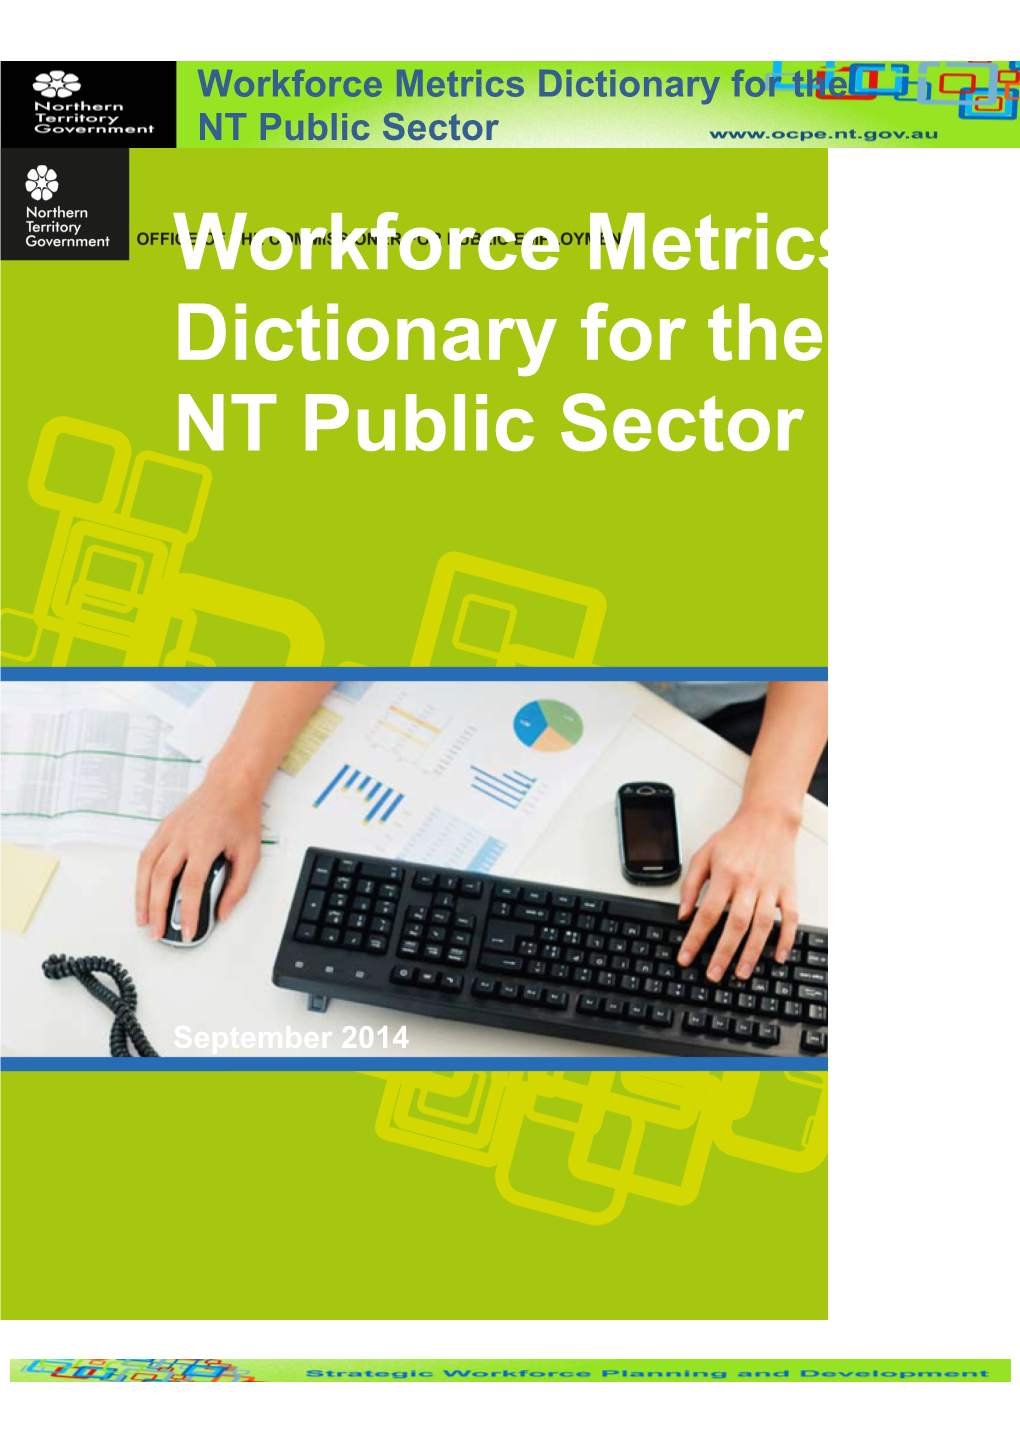 Workforce Metrics Dictionary for the NT Public Sector